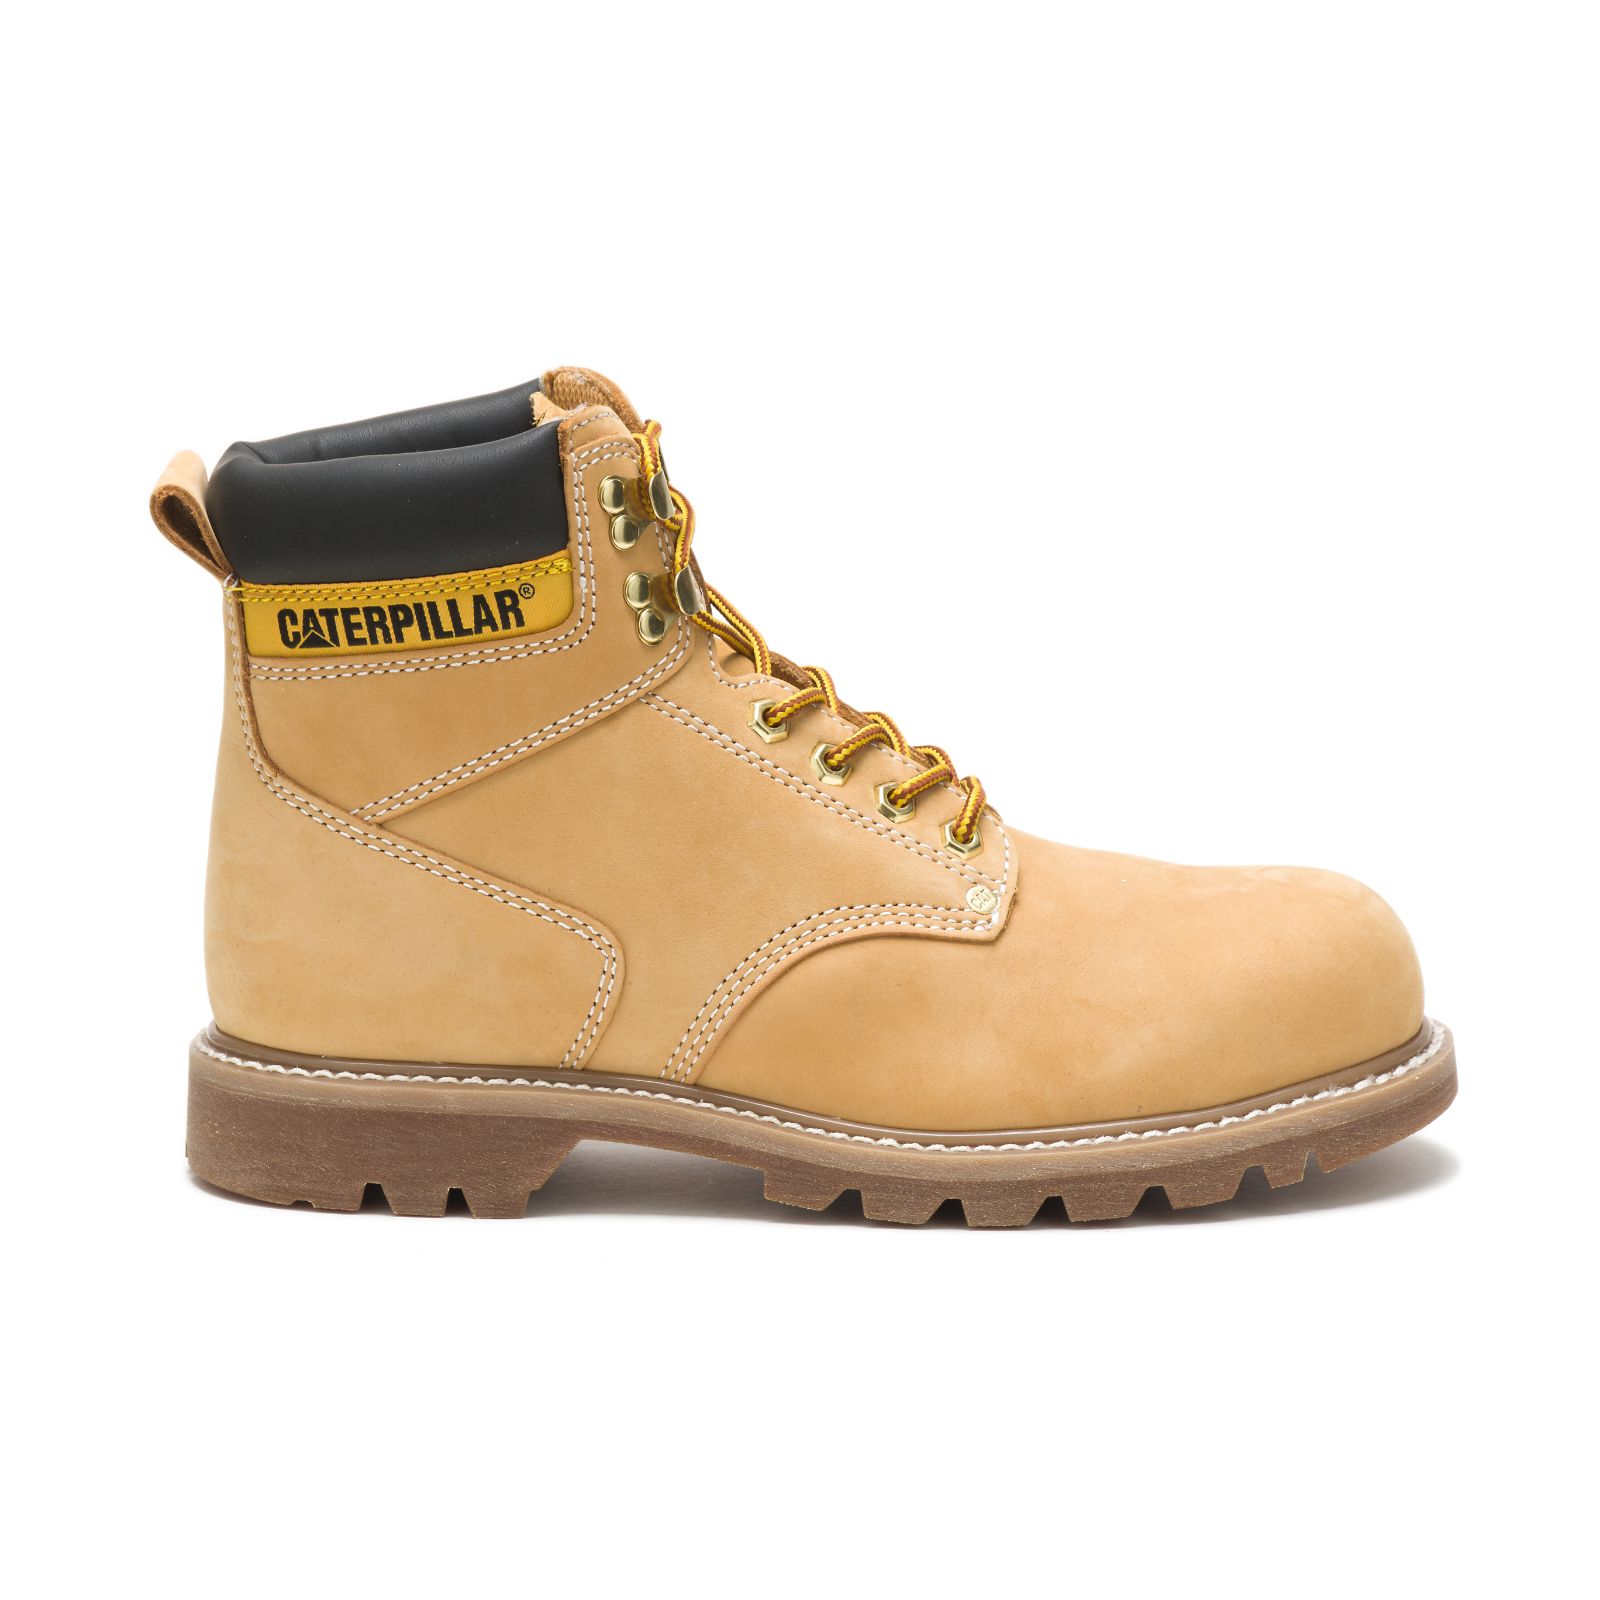 Mens Caterpillar Second Shift Steel Toe Steel Toe Boots Orange Malaysia Outlet (NQTPI8253)